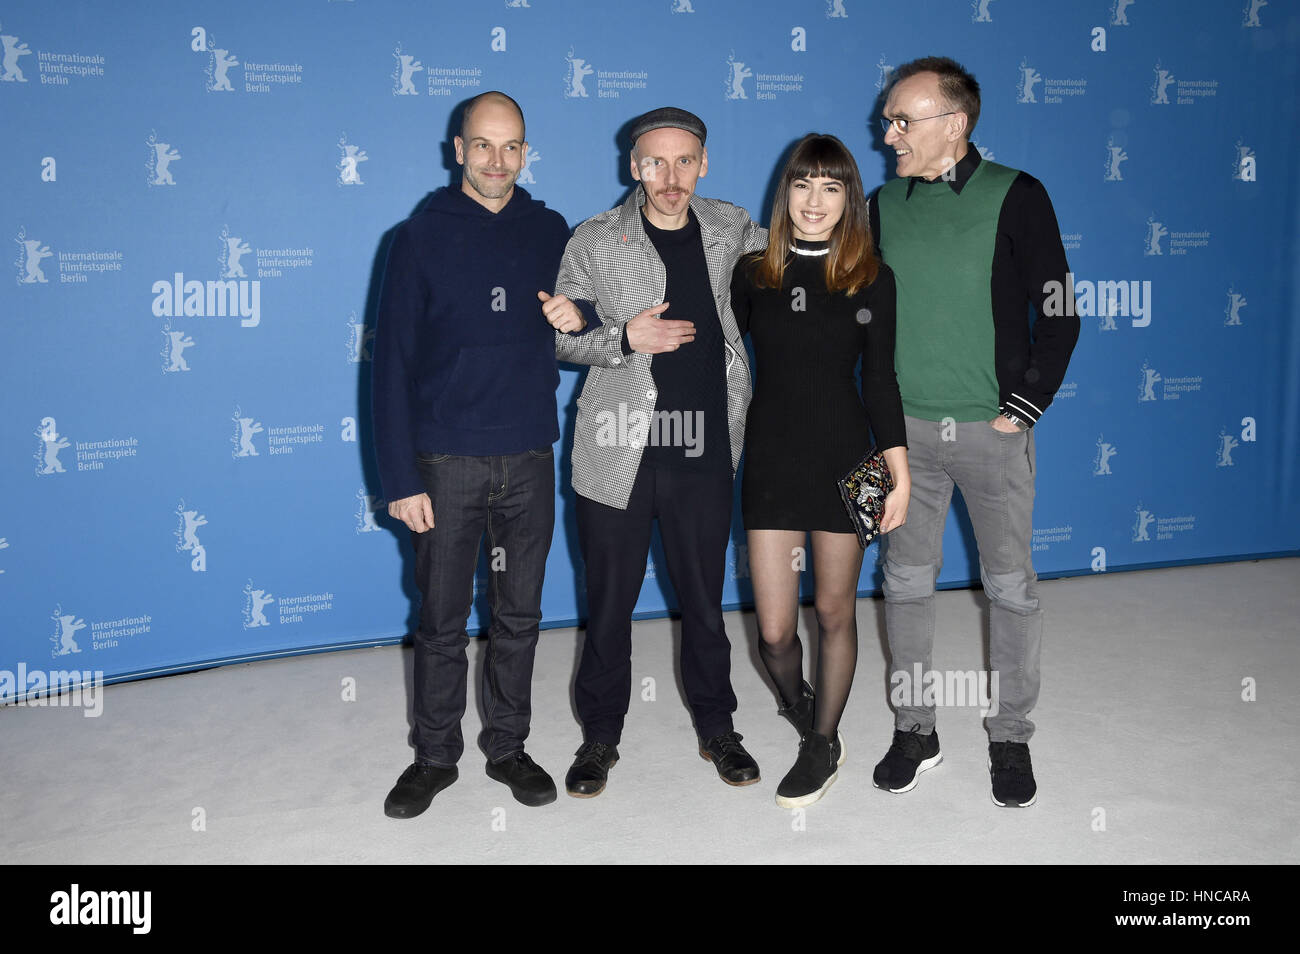 Berlin, Germany. 10th Feb, 2017. Jonny Lee Miller, Ewen Bremner, Anjela Nedyalkova and Danny Boyle during the 'T2 Trainspotting' photocall at the 67th Berlin International Film Festival/Berlinale 2017 on February 10, 2017 in Berlin, Germany. | usage worldwide Credit: dpa/Alamy Live News Stock Photo